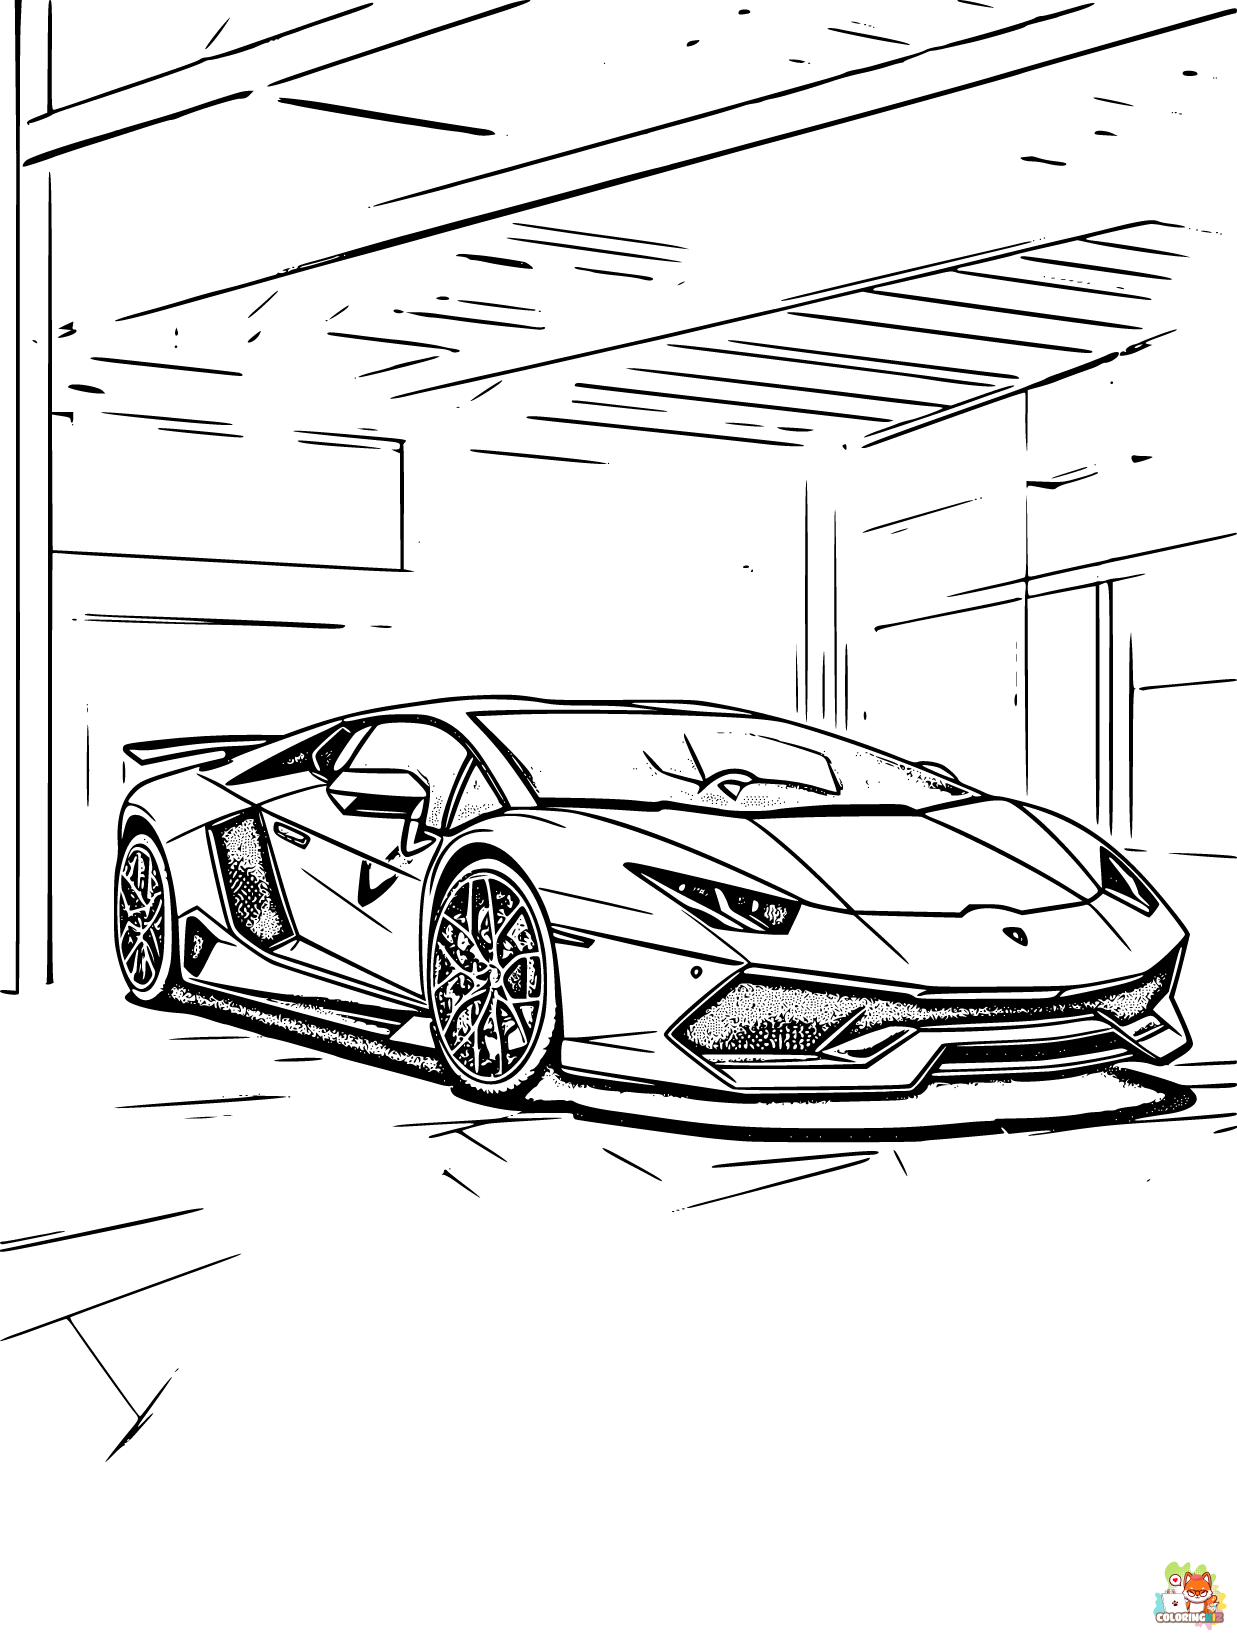 Free Lamborghini coloring pages for kids